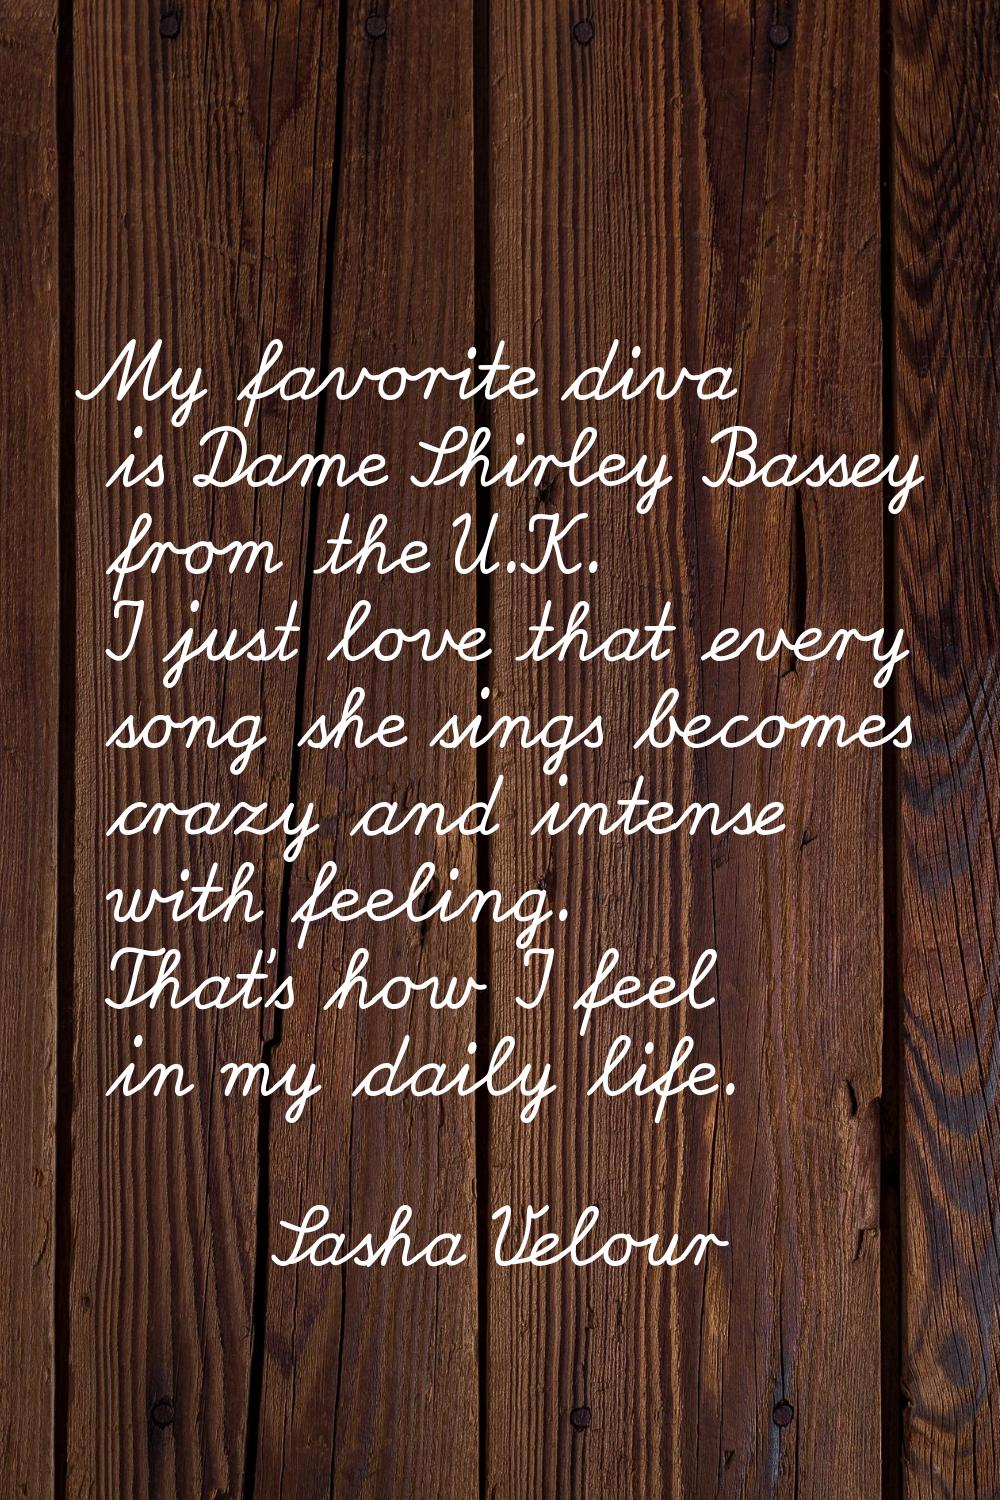 My favorite diva is Dame Shirley Bassey from the U.K. I just love that every song she sings becomes